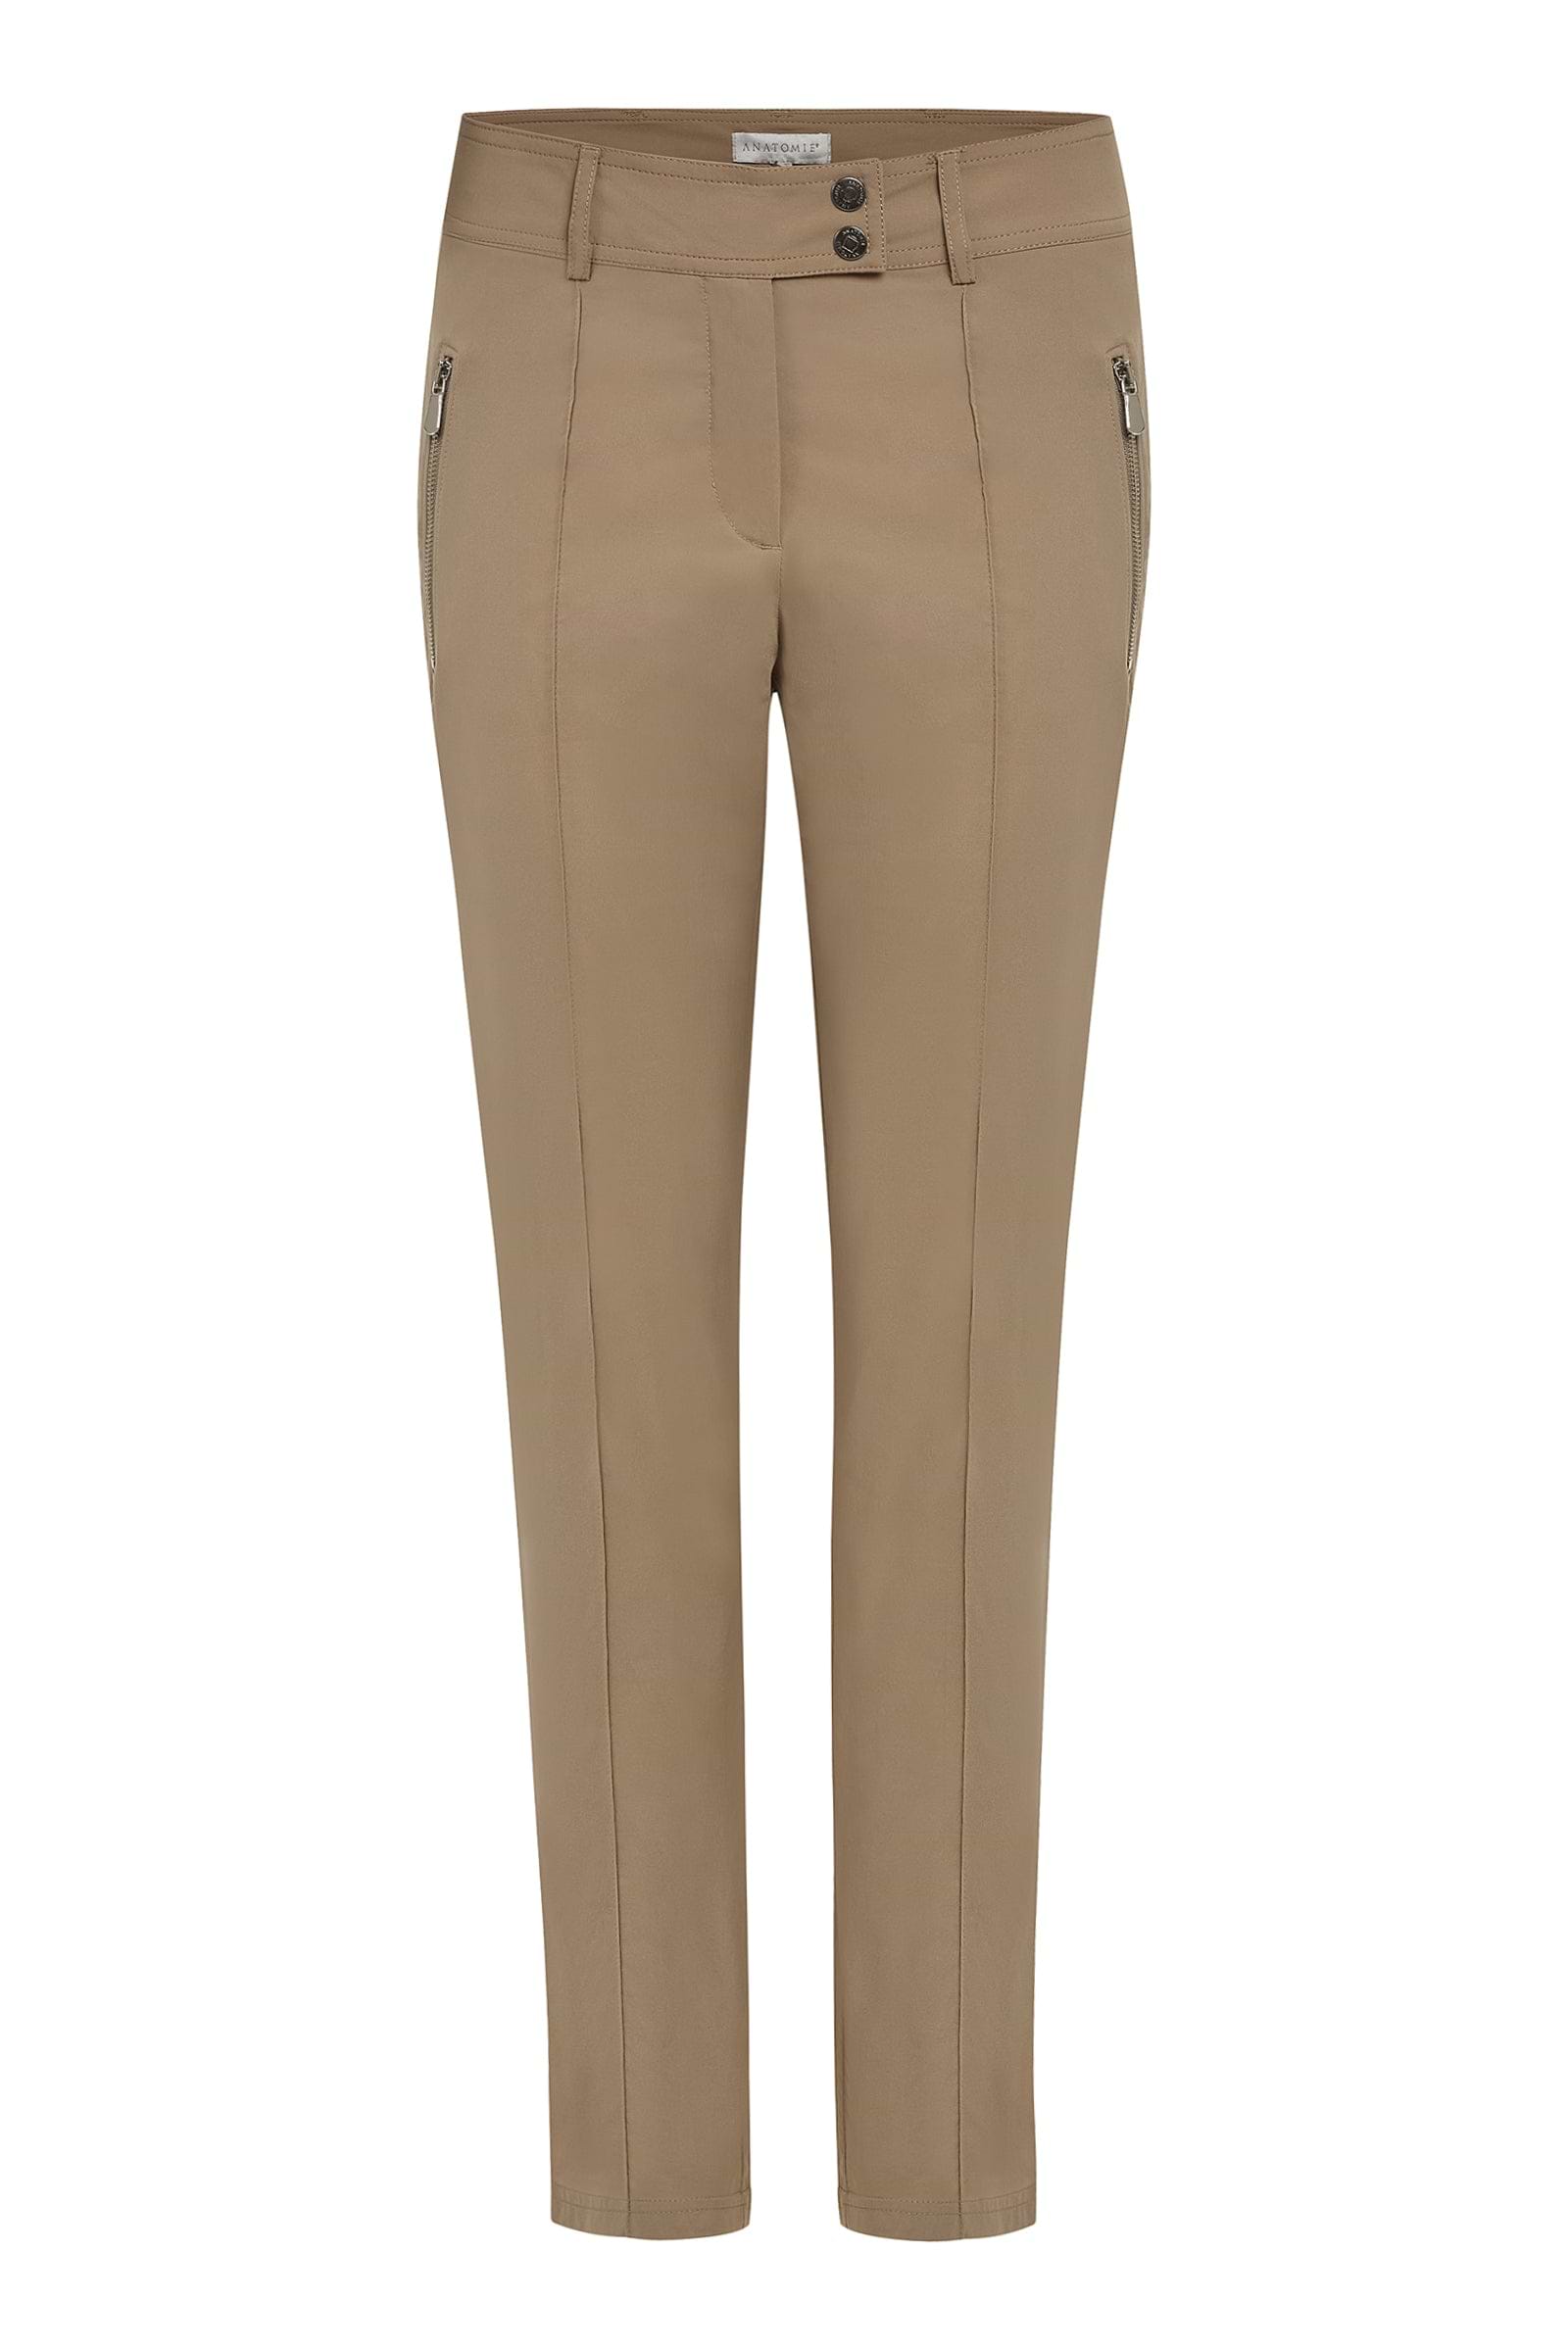 The Best Travel Pants. Flat Lay of the Peggy Zippered Pant in Khaki